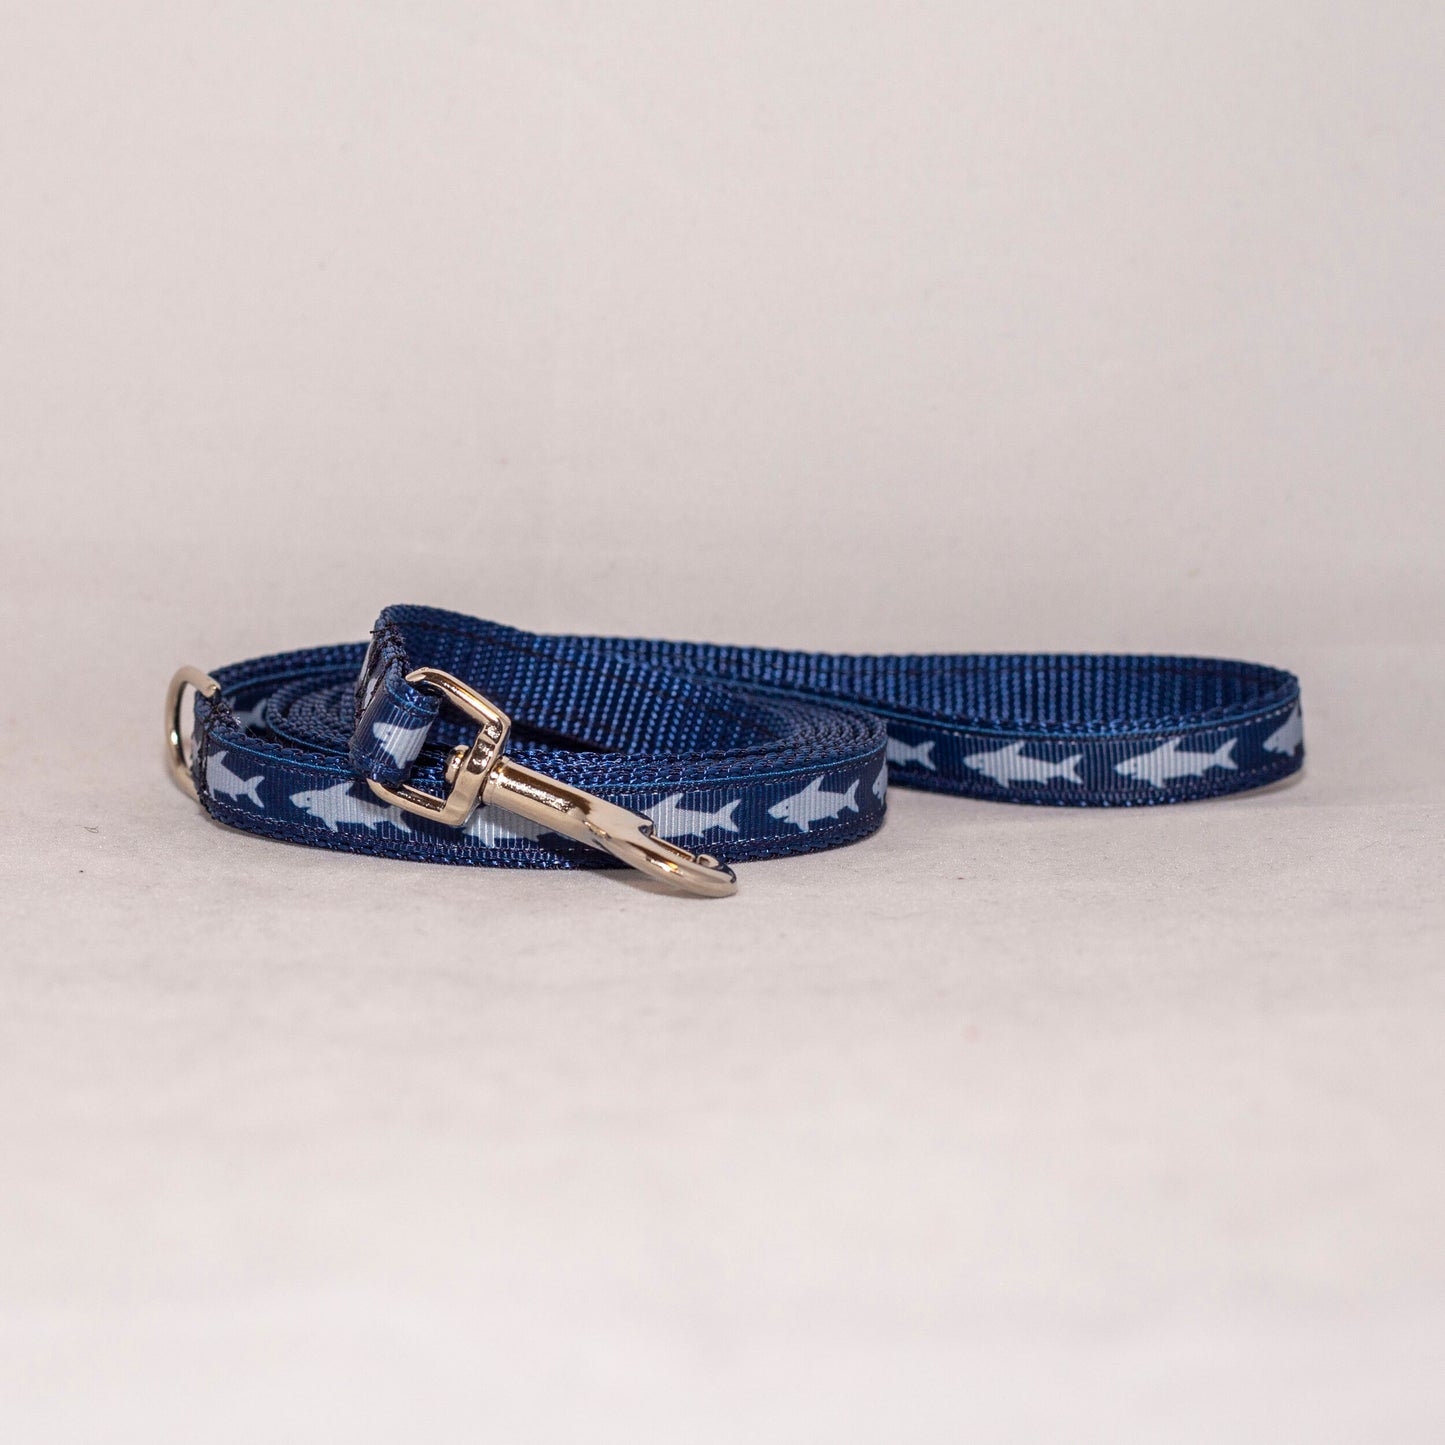 Navy Blue Sharks Small Dog Collar and Leash (1/2" Wide)